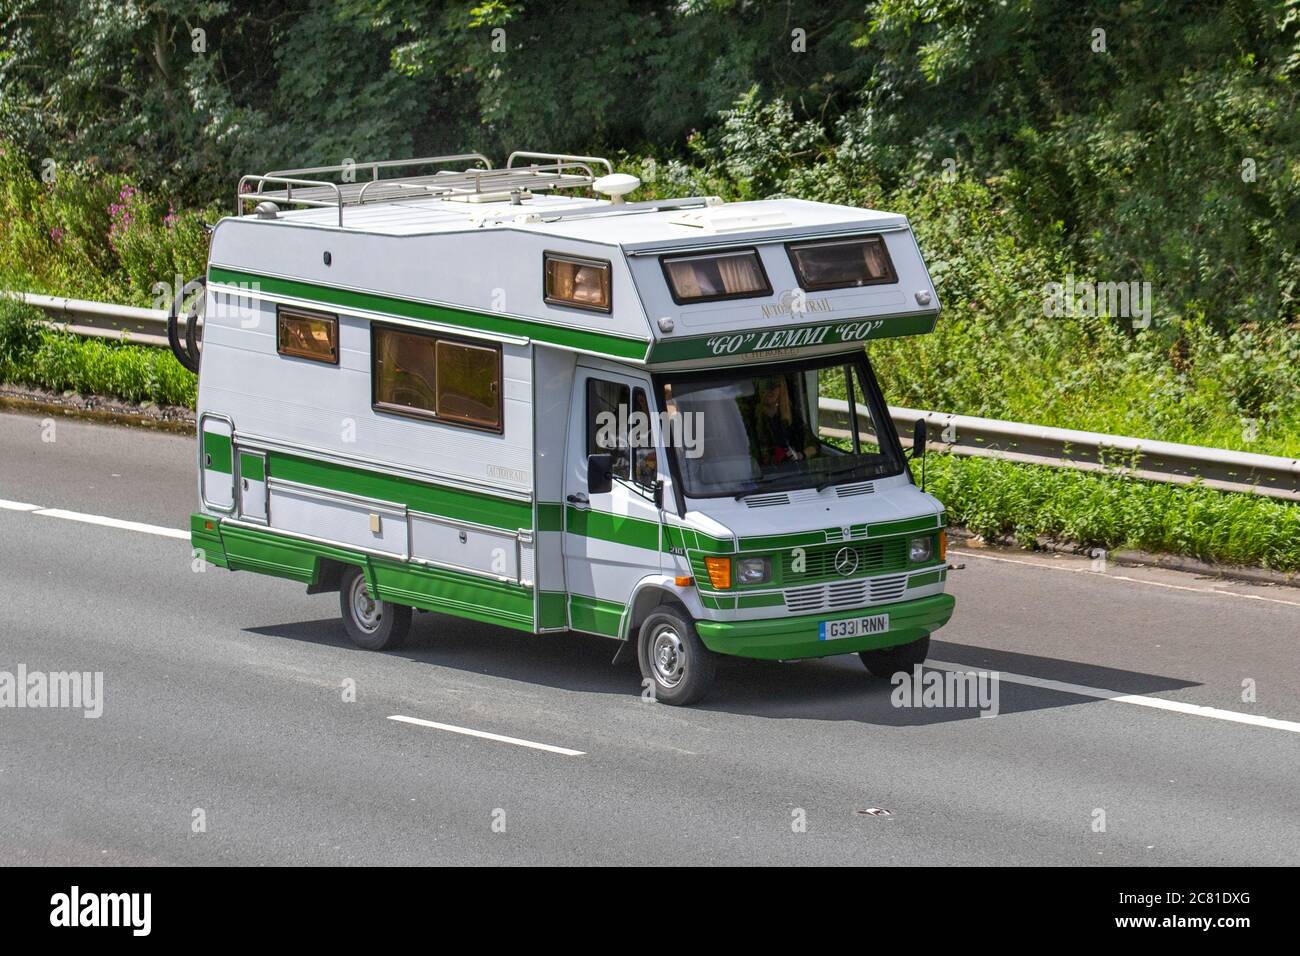 'Go' Lemmi 'Go' 1990 90s green white Mercedes Benz 210 Touring AutoTrail Caravans and Cherokee Motorhomes, campervans on Britain's roads, RV leisure vehicle, family holidays, caravanette vacations, caravan holiday, van conversions, autohome, life on the road, Stock Photo